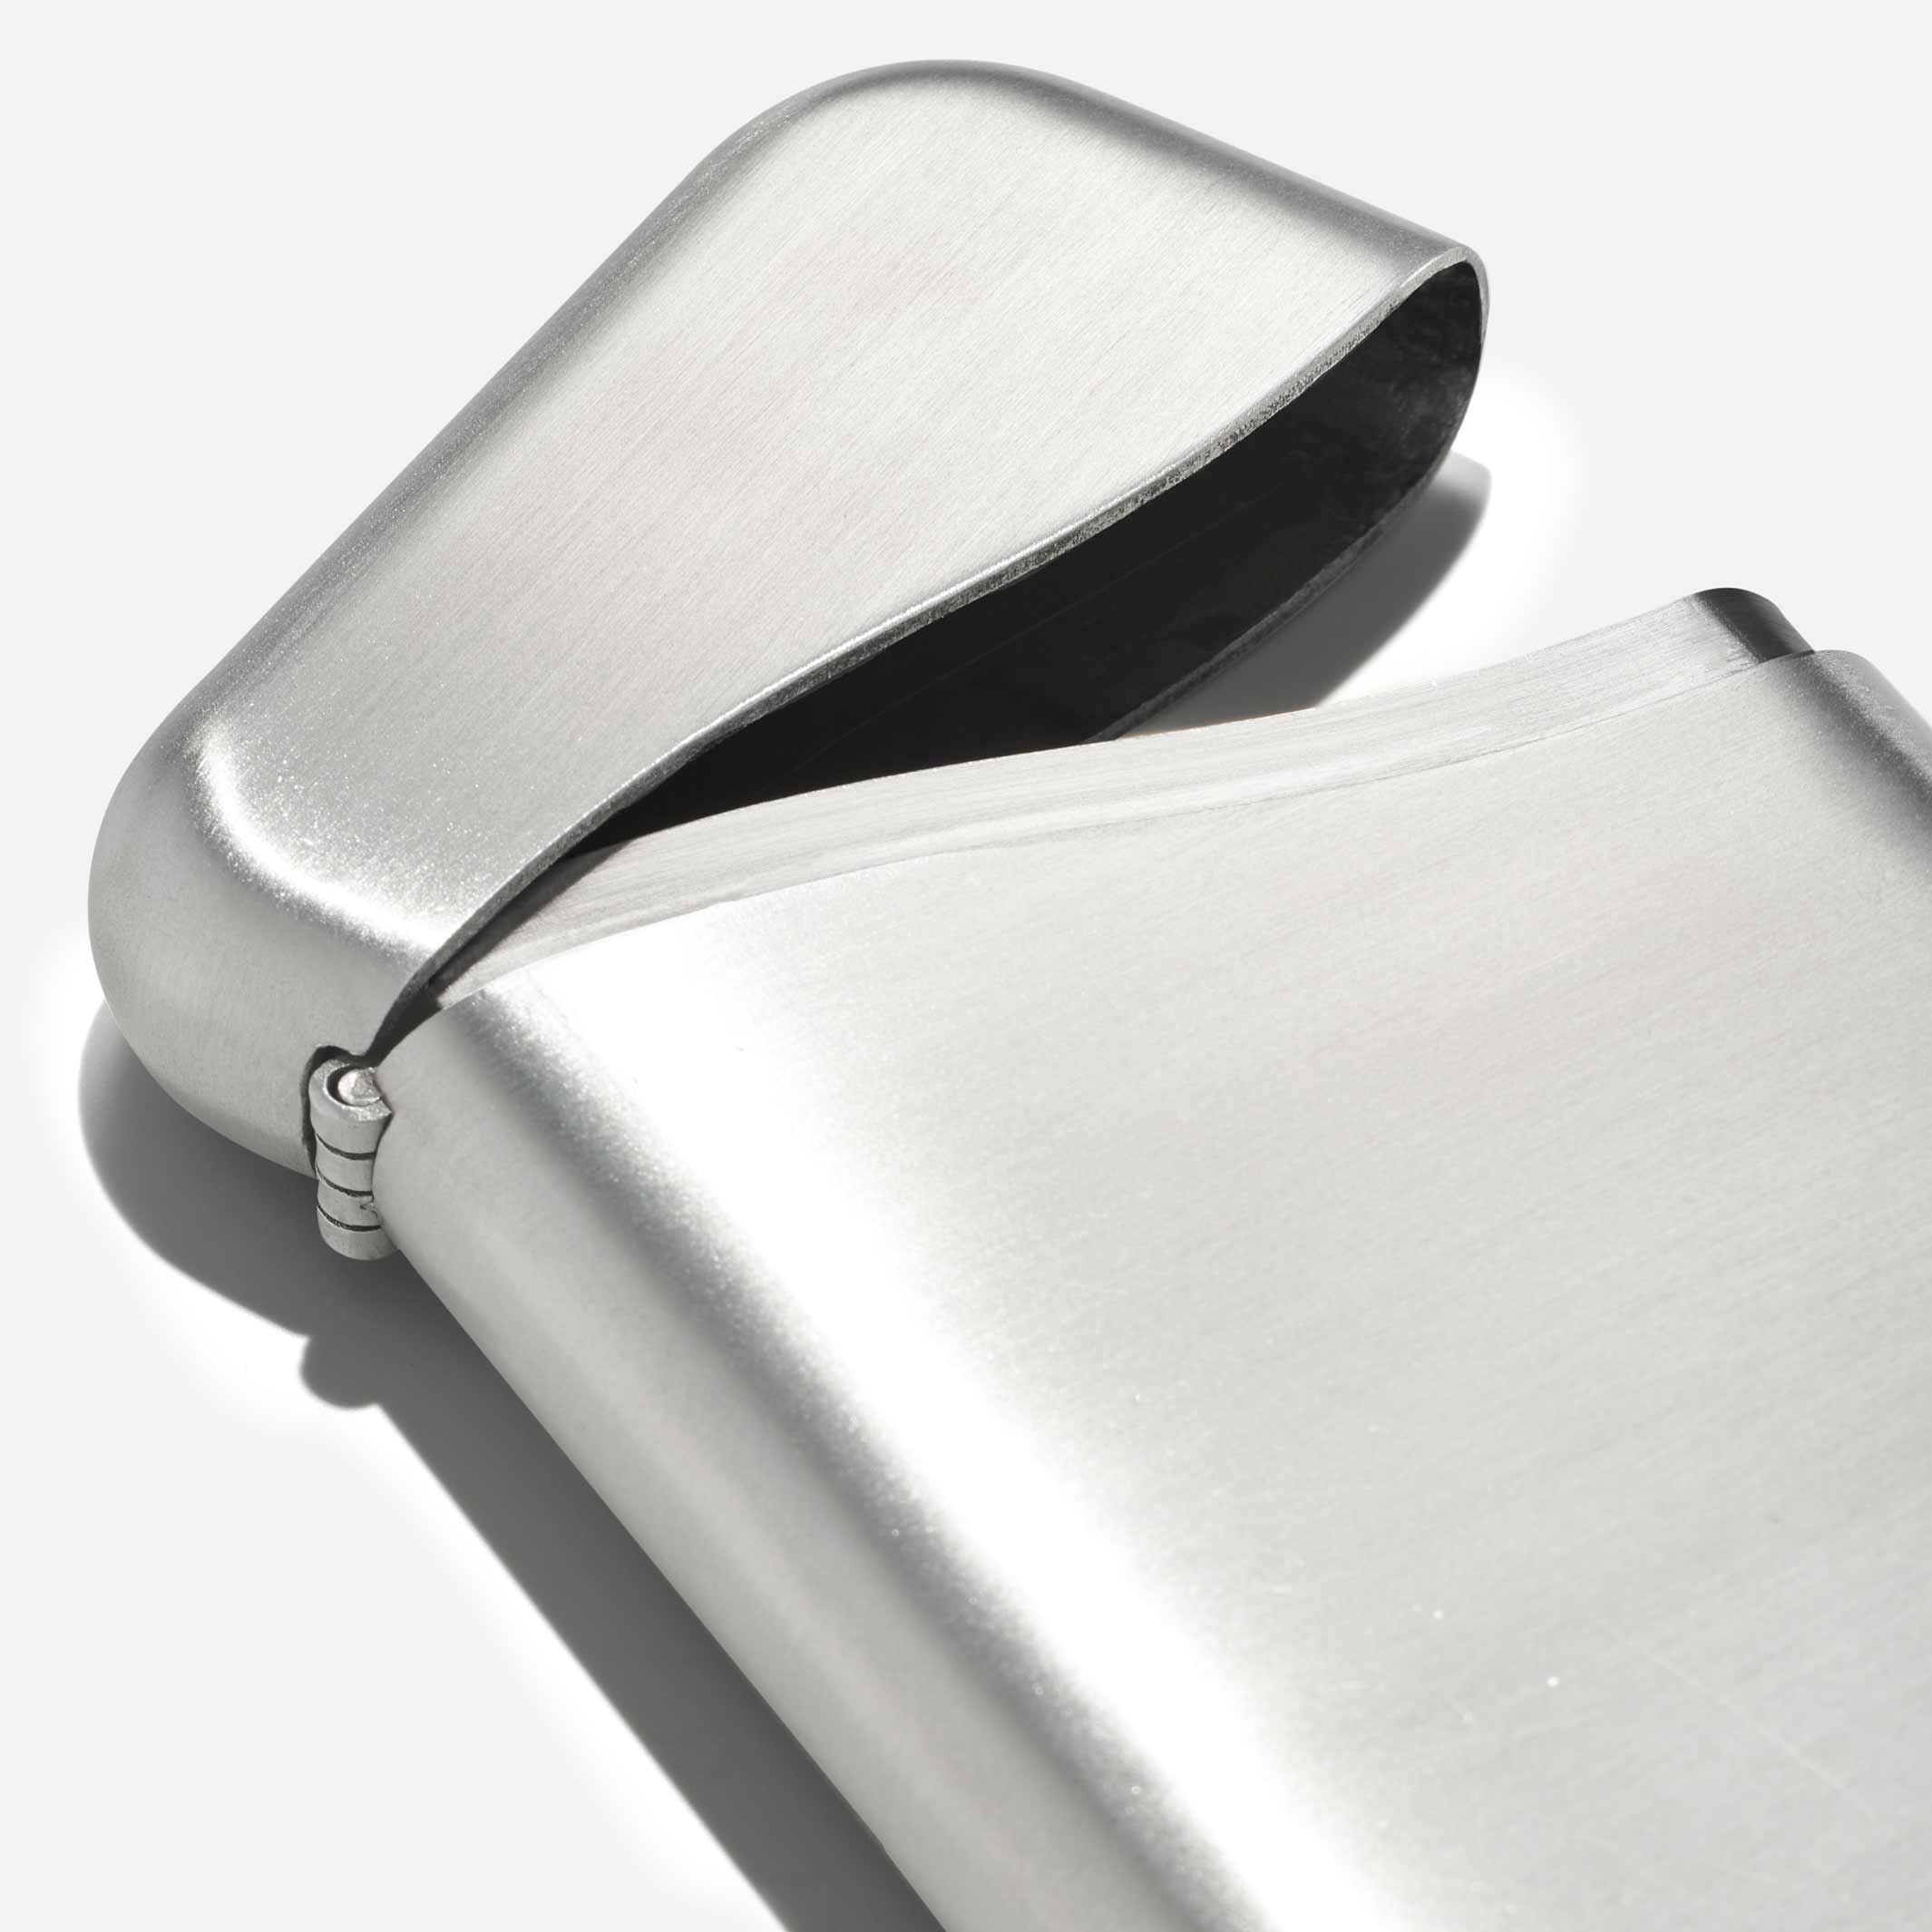 SUMMIT | CARD CASE | Silver Stainless Steel | Craighill